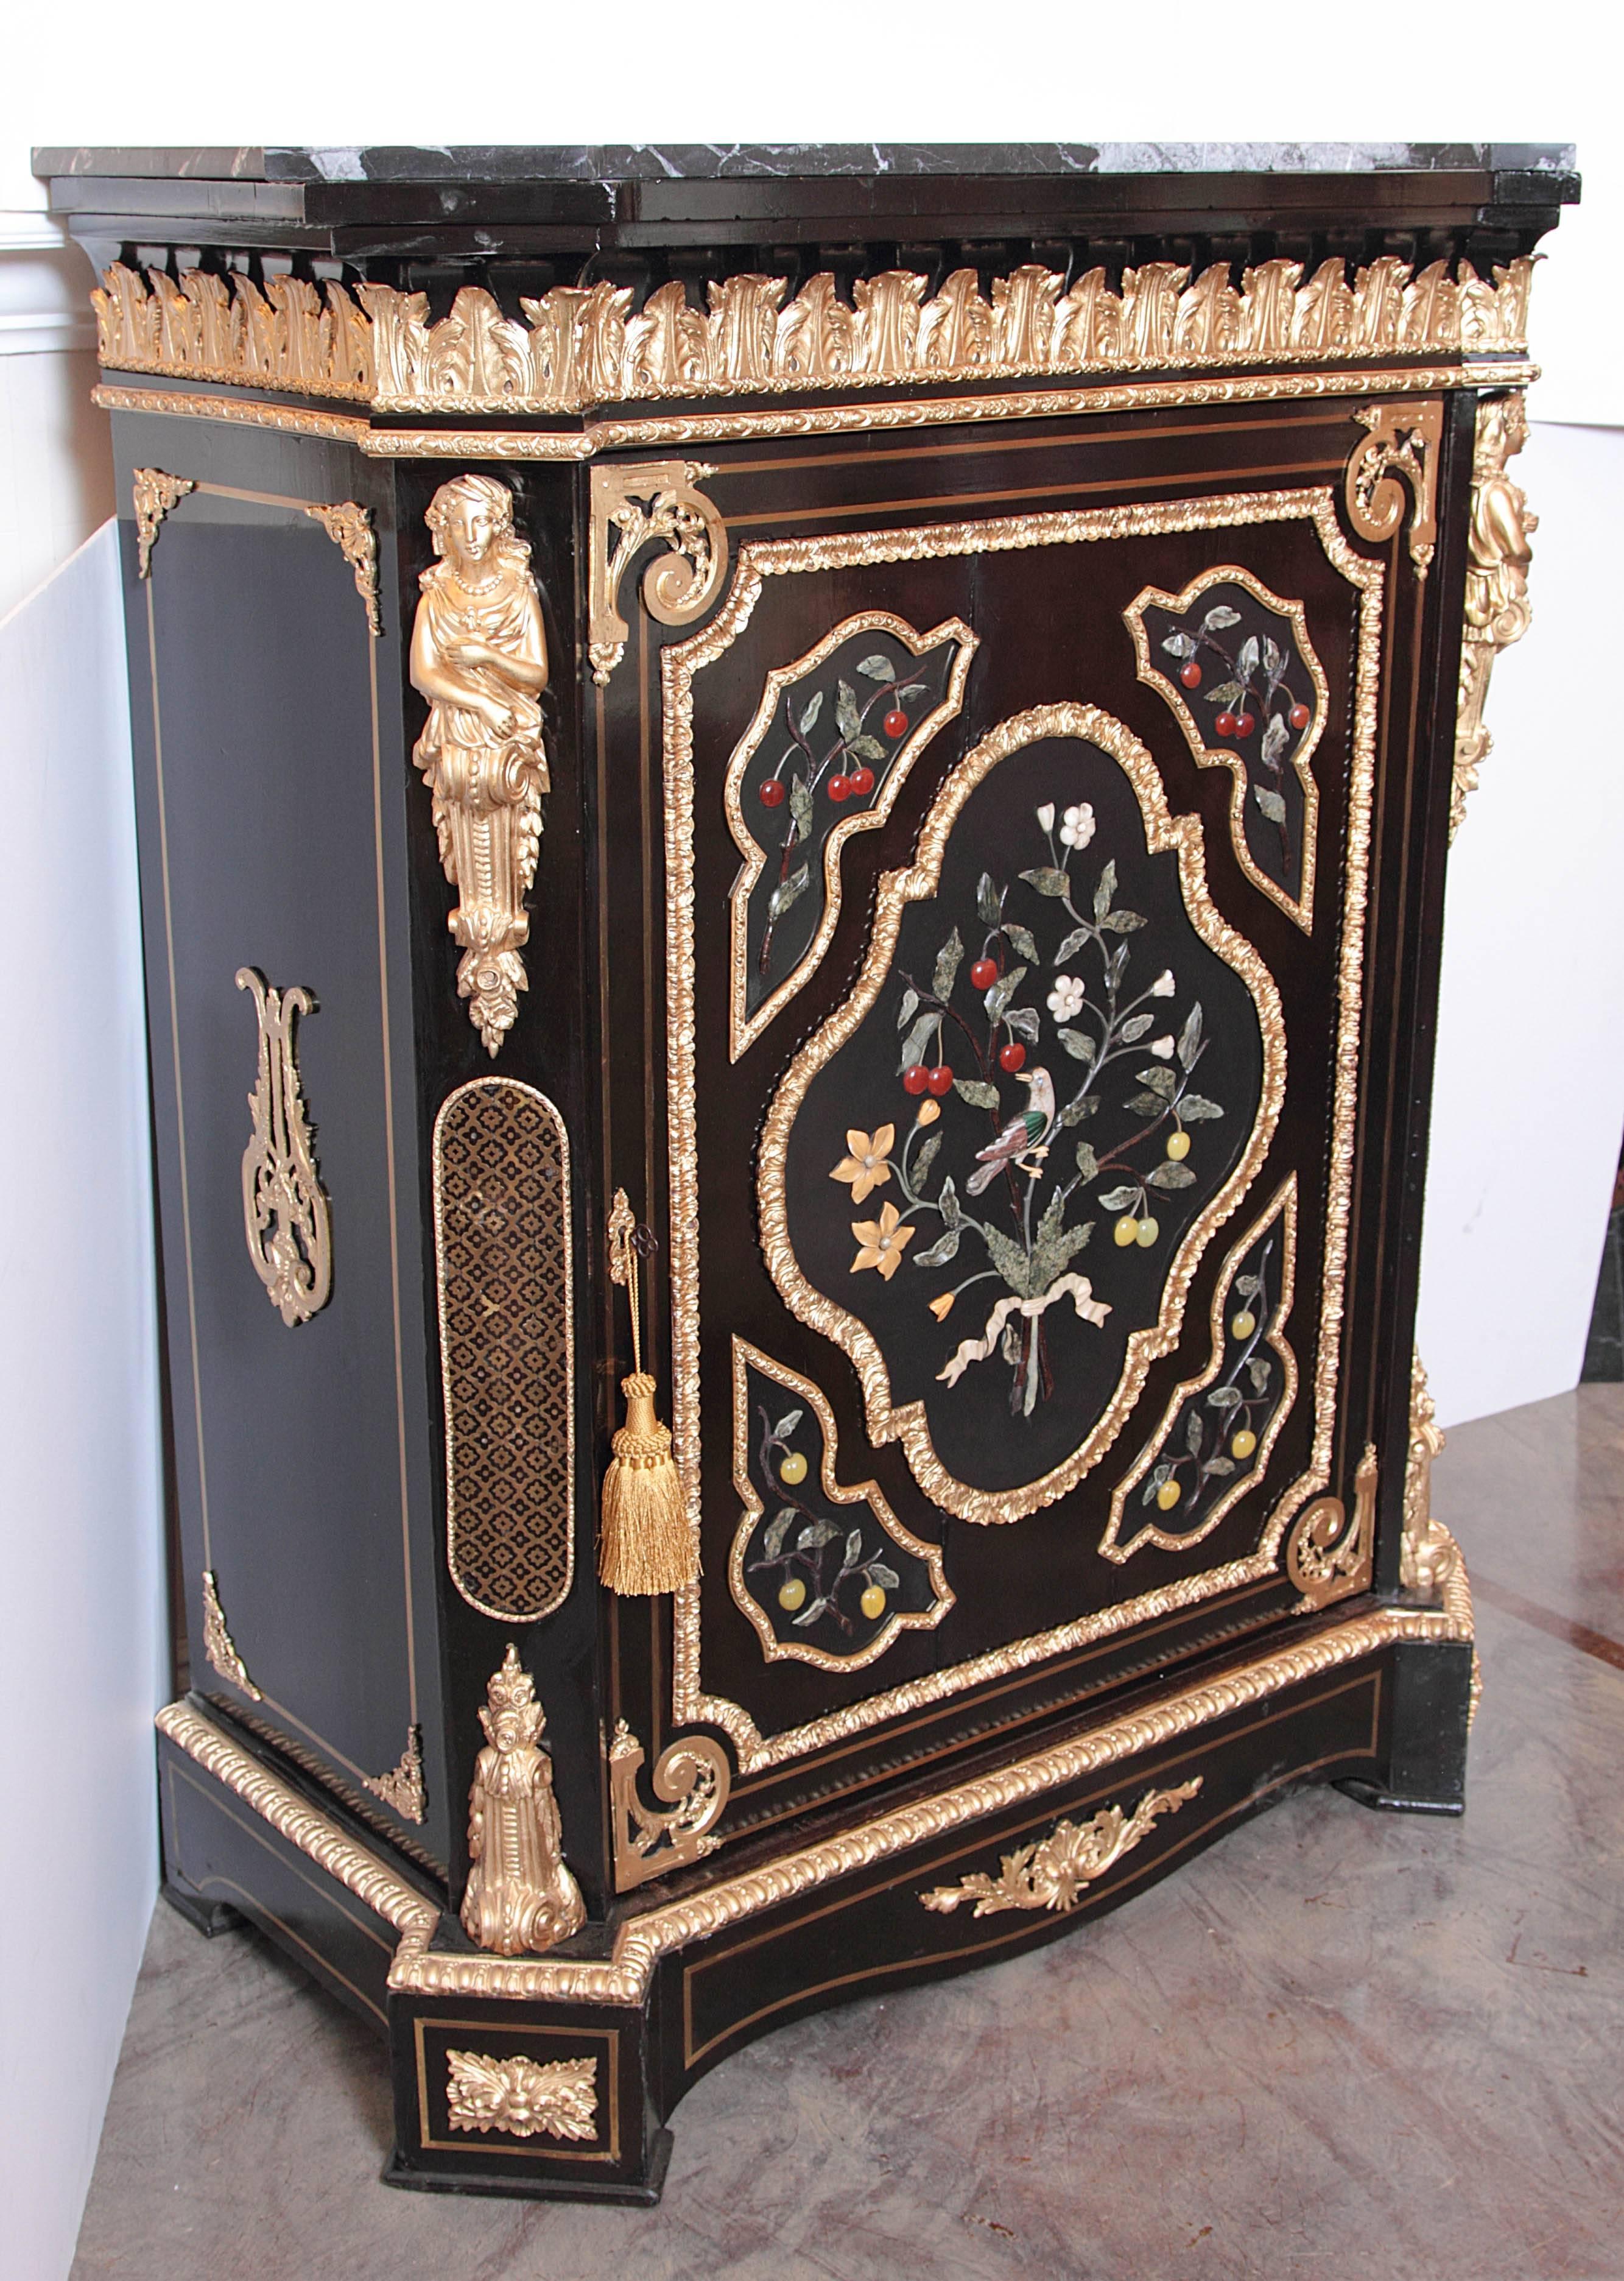 Pair of 19th c French ebonized and pietra dura inlayed cabinets with gilt bronze mounts . marble tops signed Belfort Jeune . pictured in European furniture book by Christopher Payne page 144 